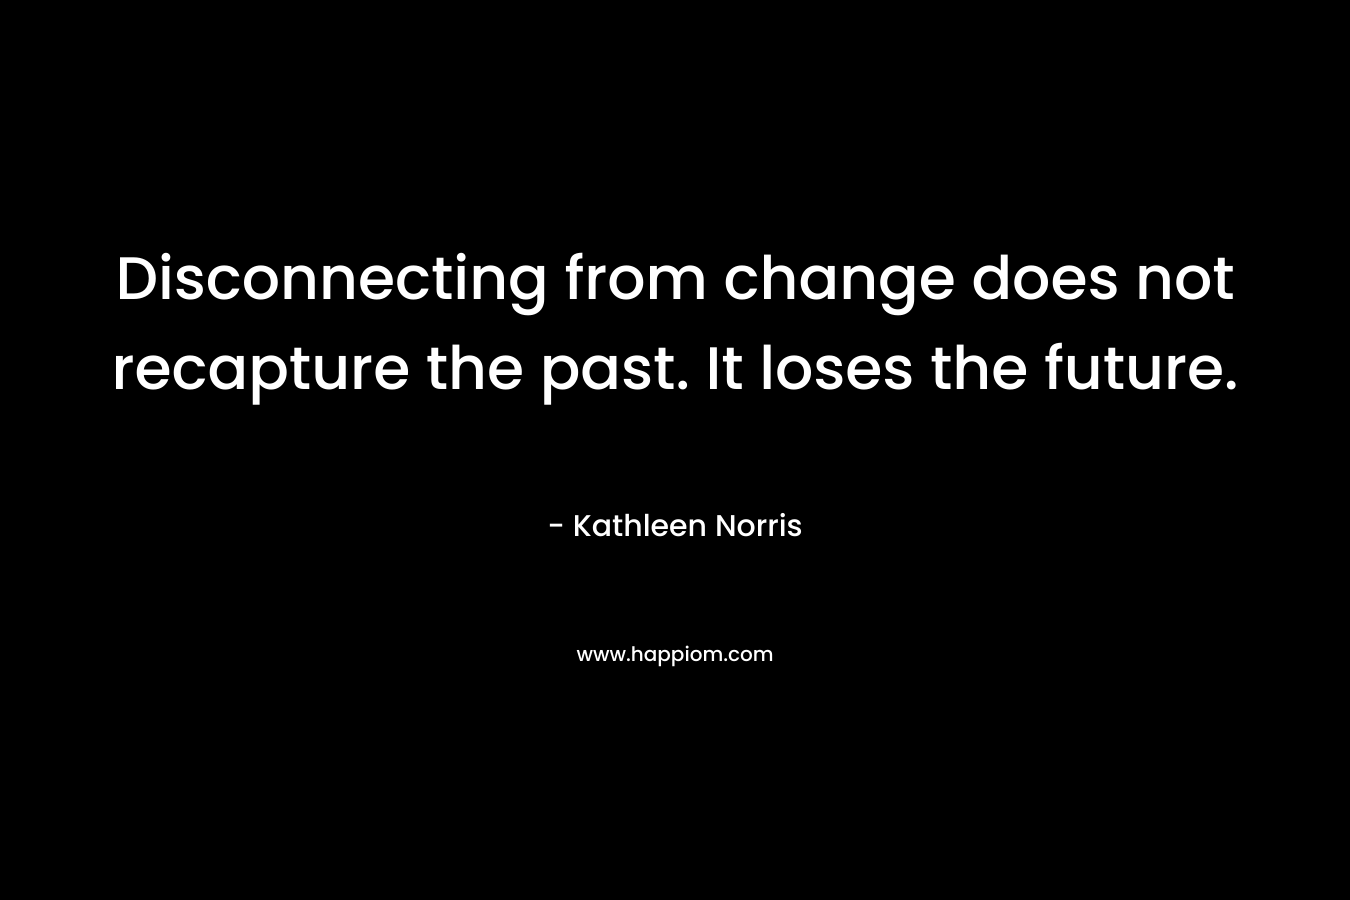 Disconnecting from change does not recapture the past. It loses the future.